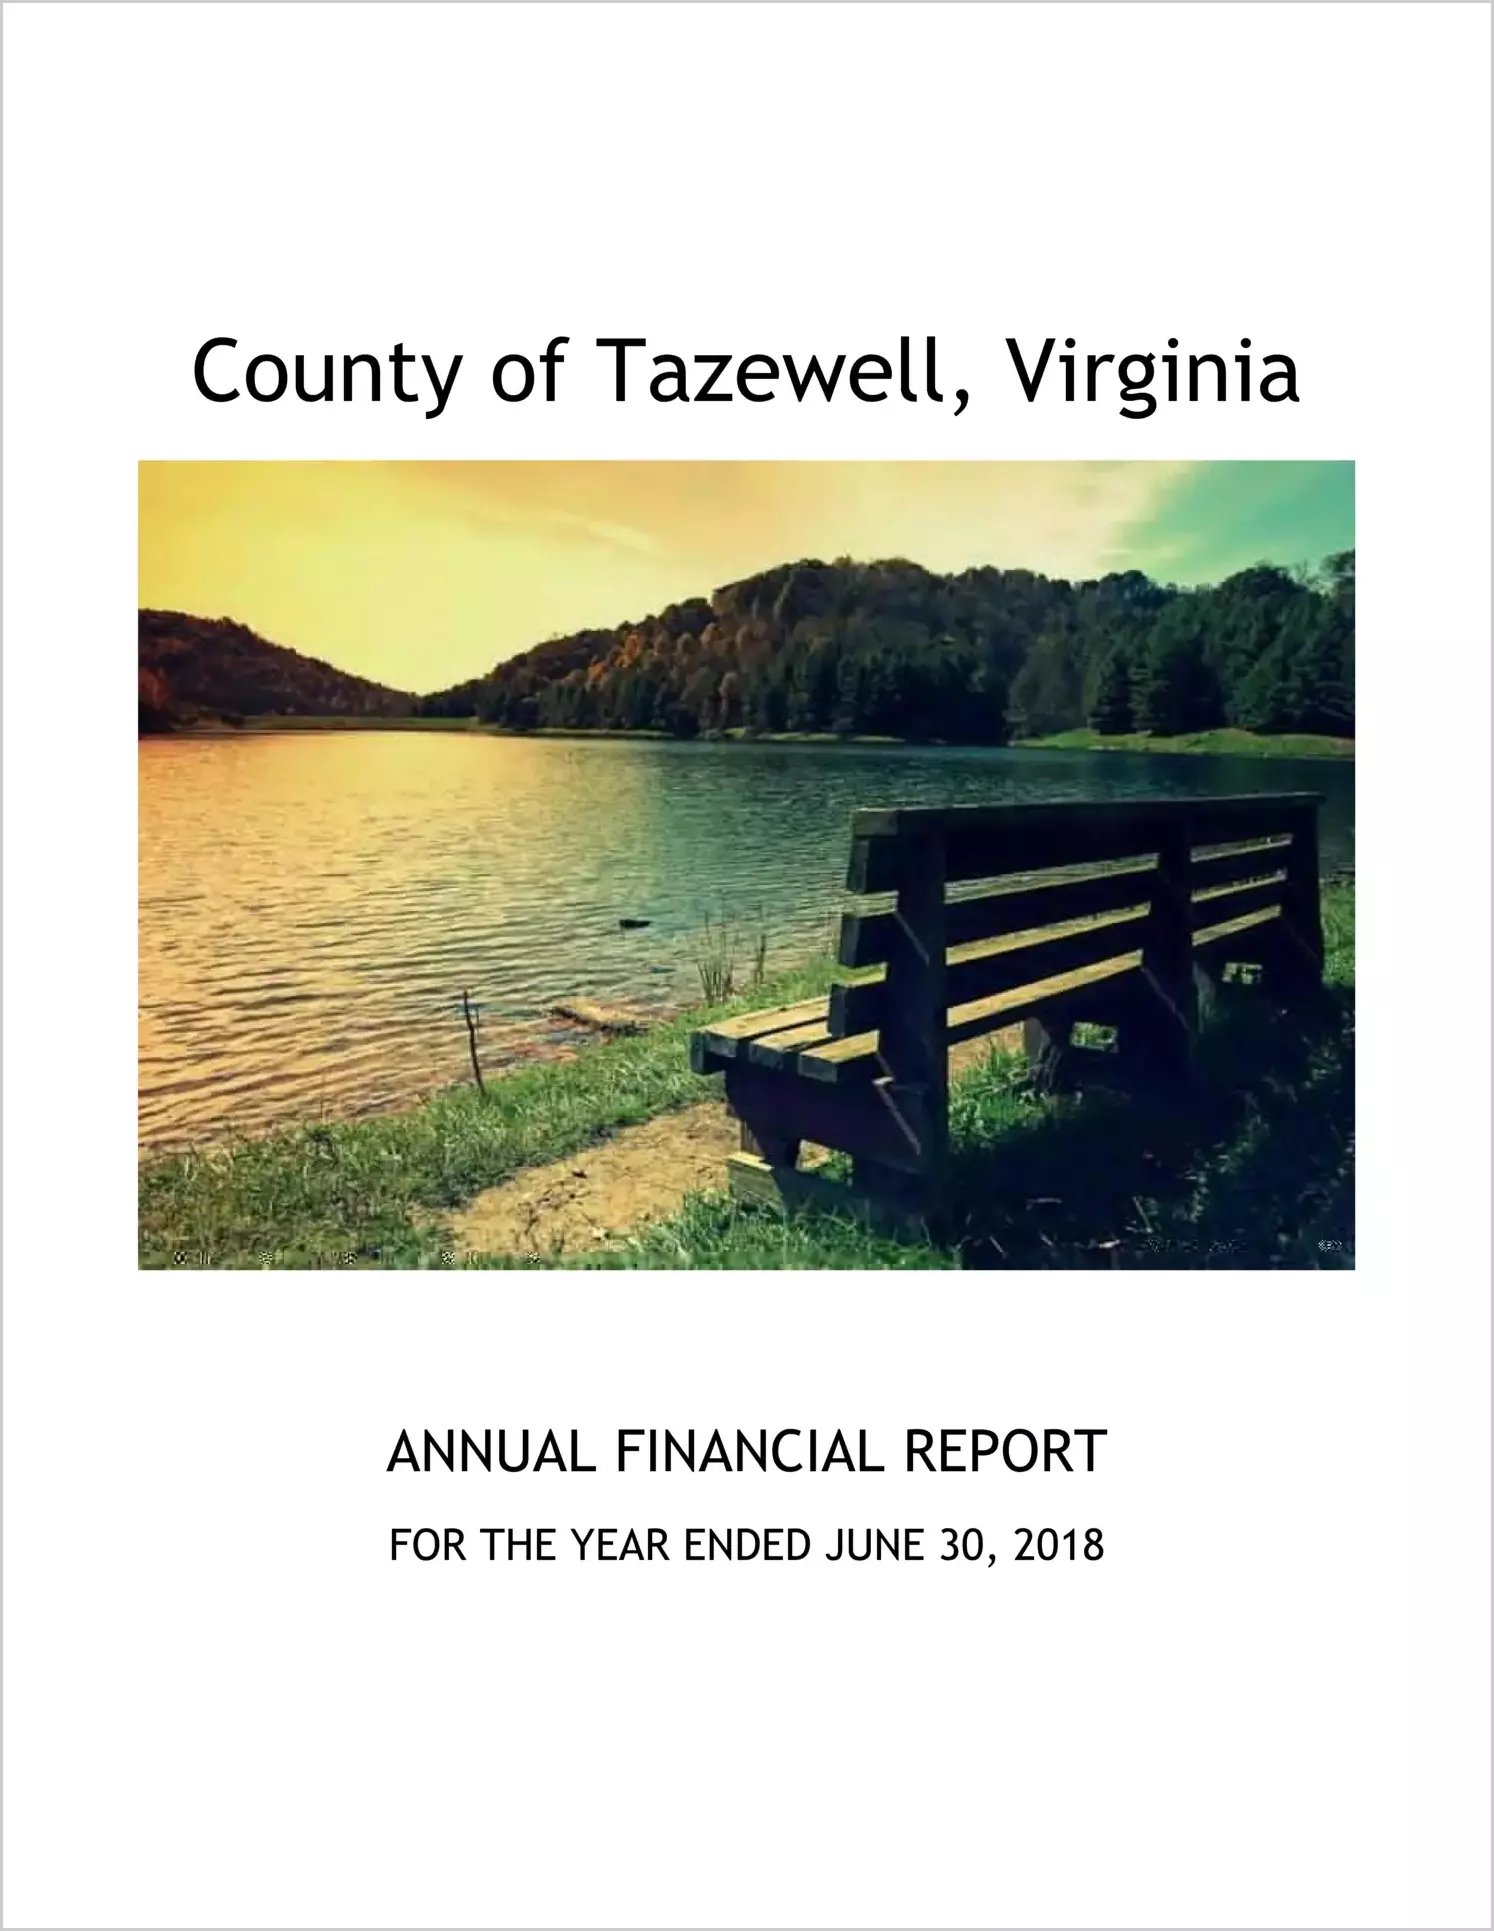 2018 Annual Financial Report for County of Tazewell